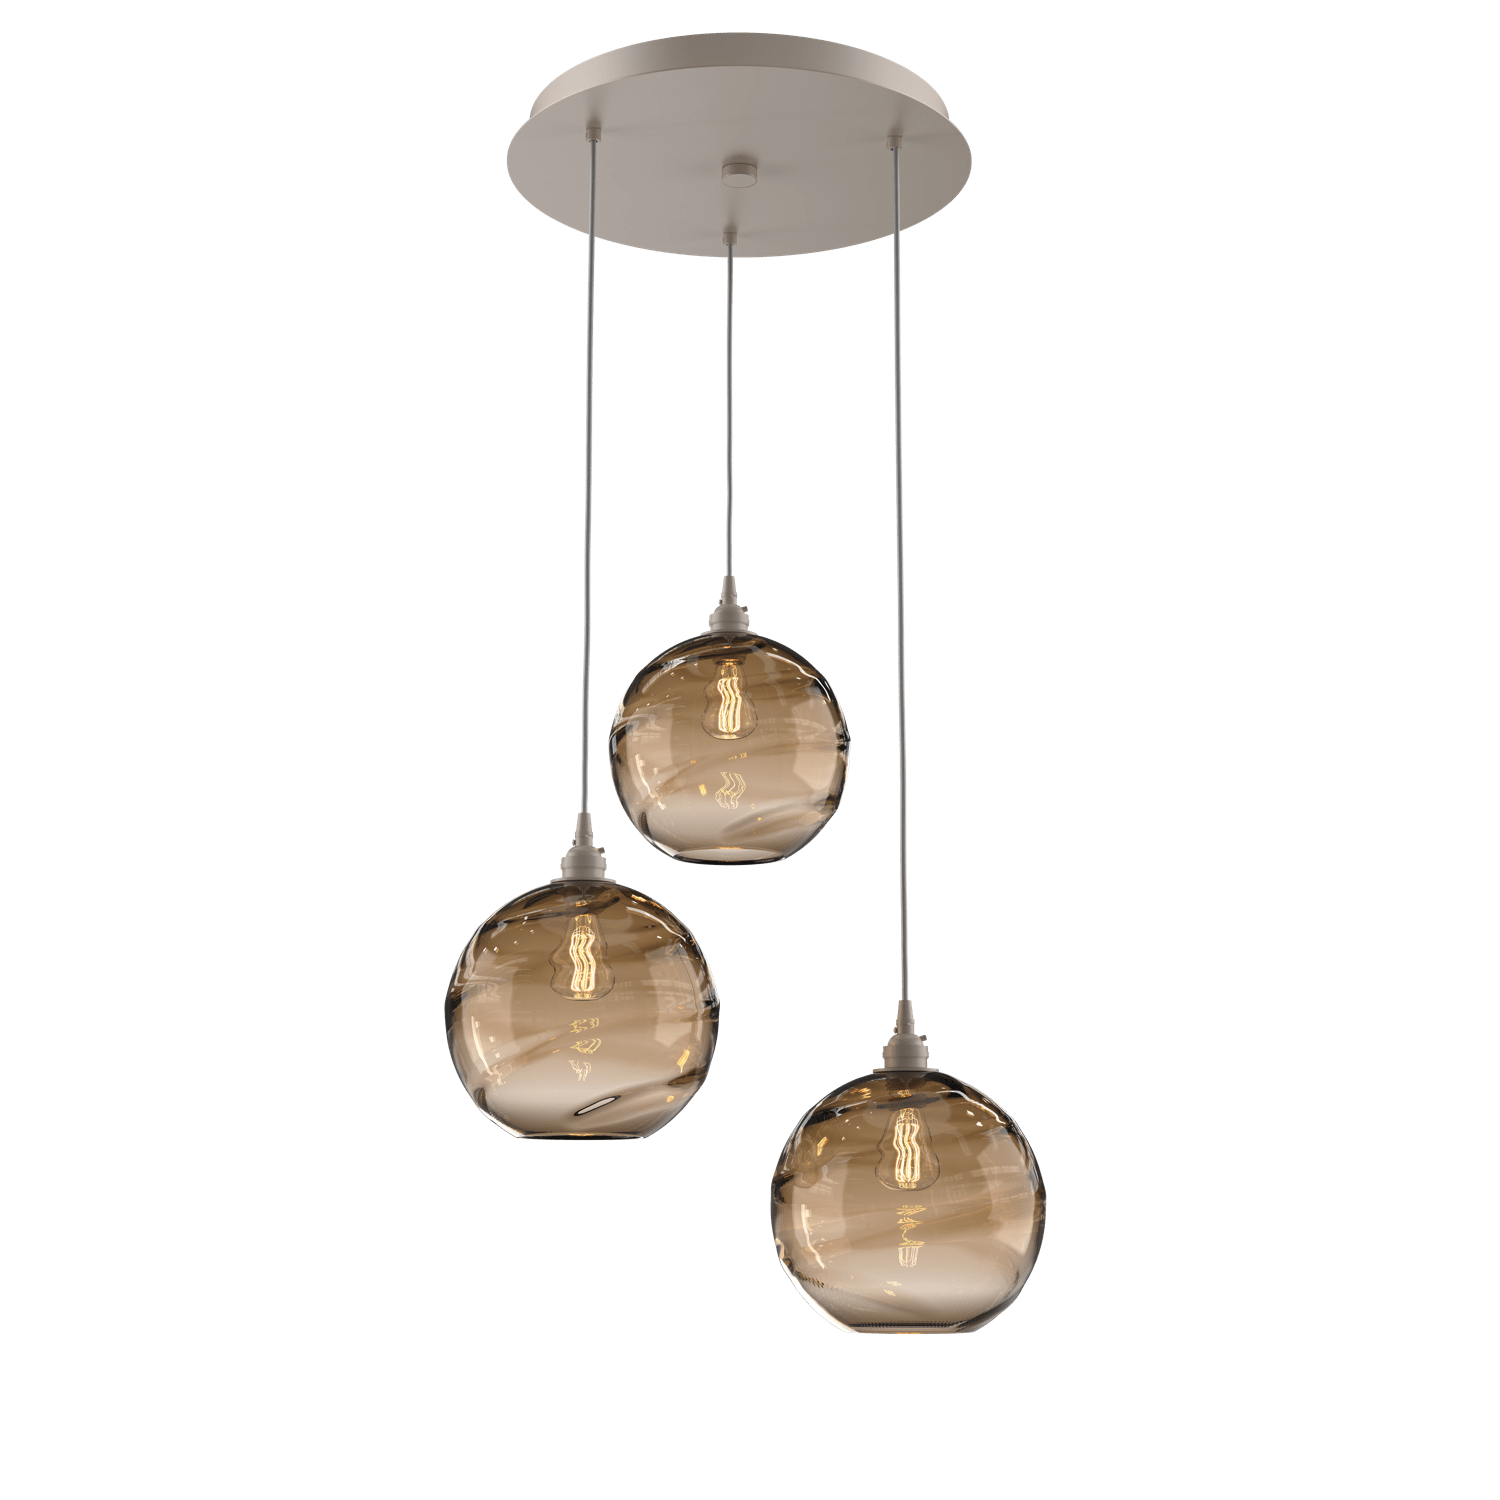 CHB0047-03-BS-OB-Hammerton-Studio-Optic-Blown-Glass-Terra-3-light-round-pendant-chandelier-with-metallic-beige-silver-finish-and-optic-bronze-blown-glass-shades-and-incandescent-lamping